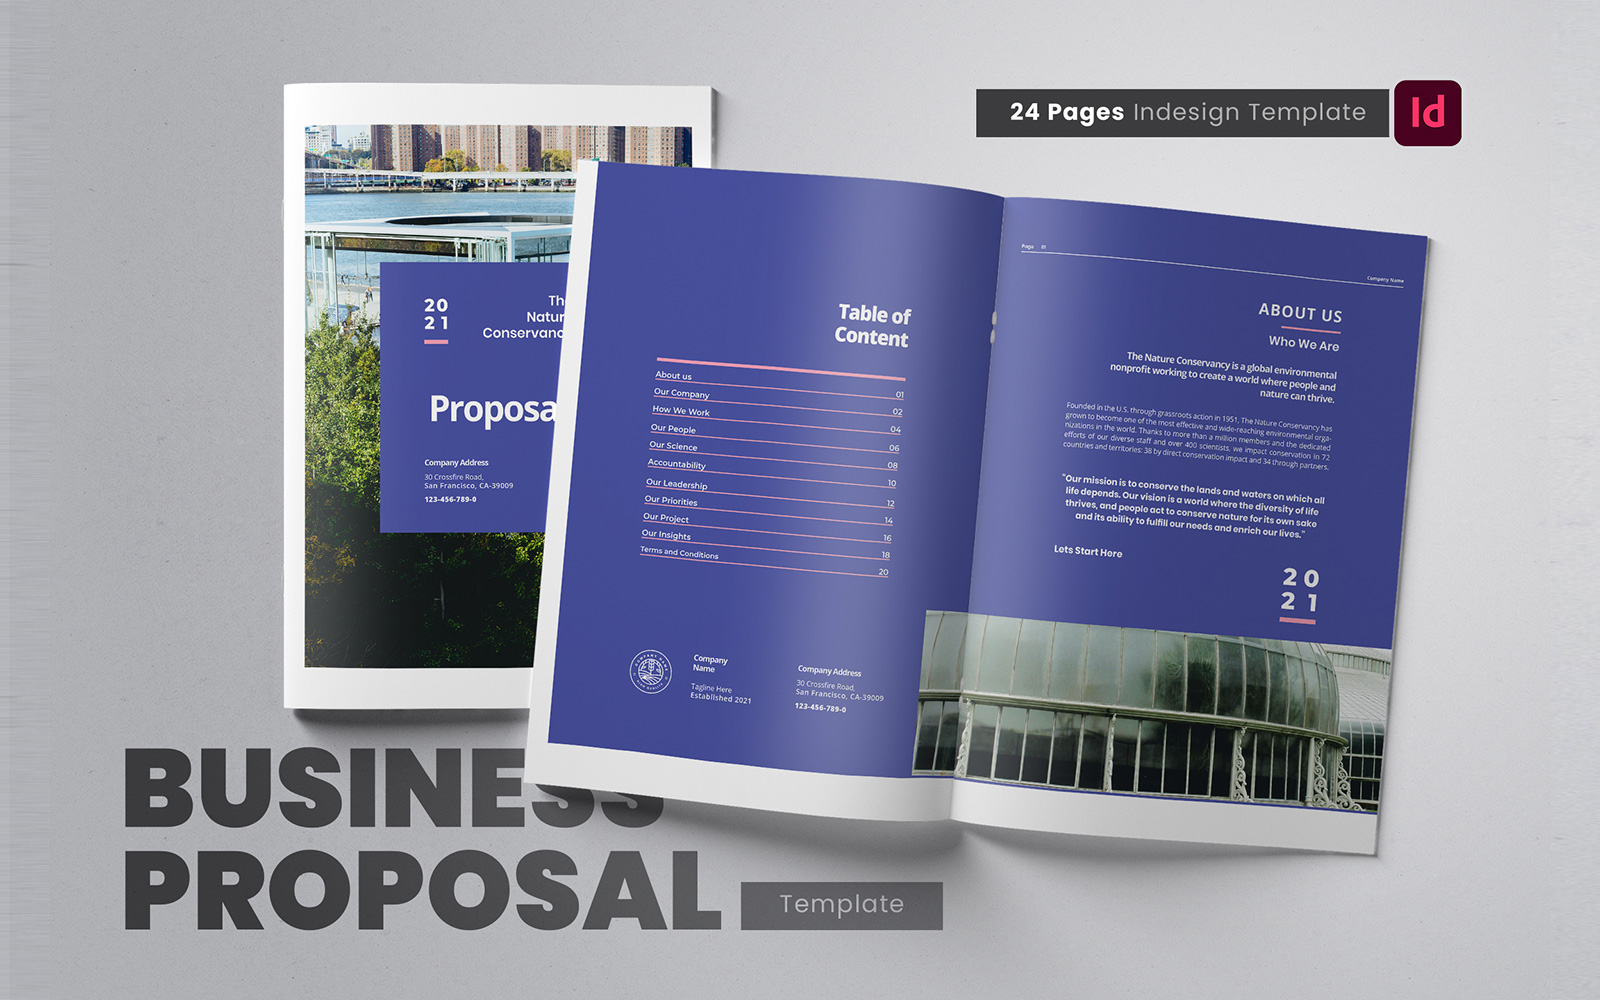 Business Project Proposal Indesign Template - Corporate Identity Within Business Proposal Indesign Template